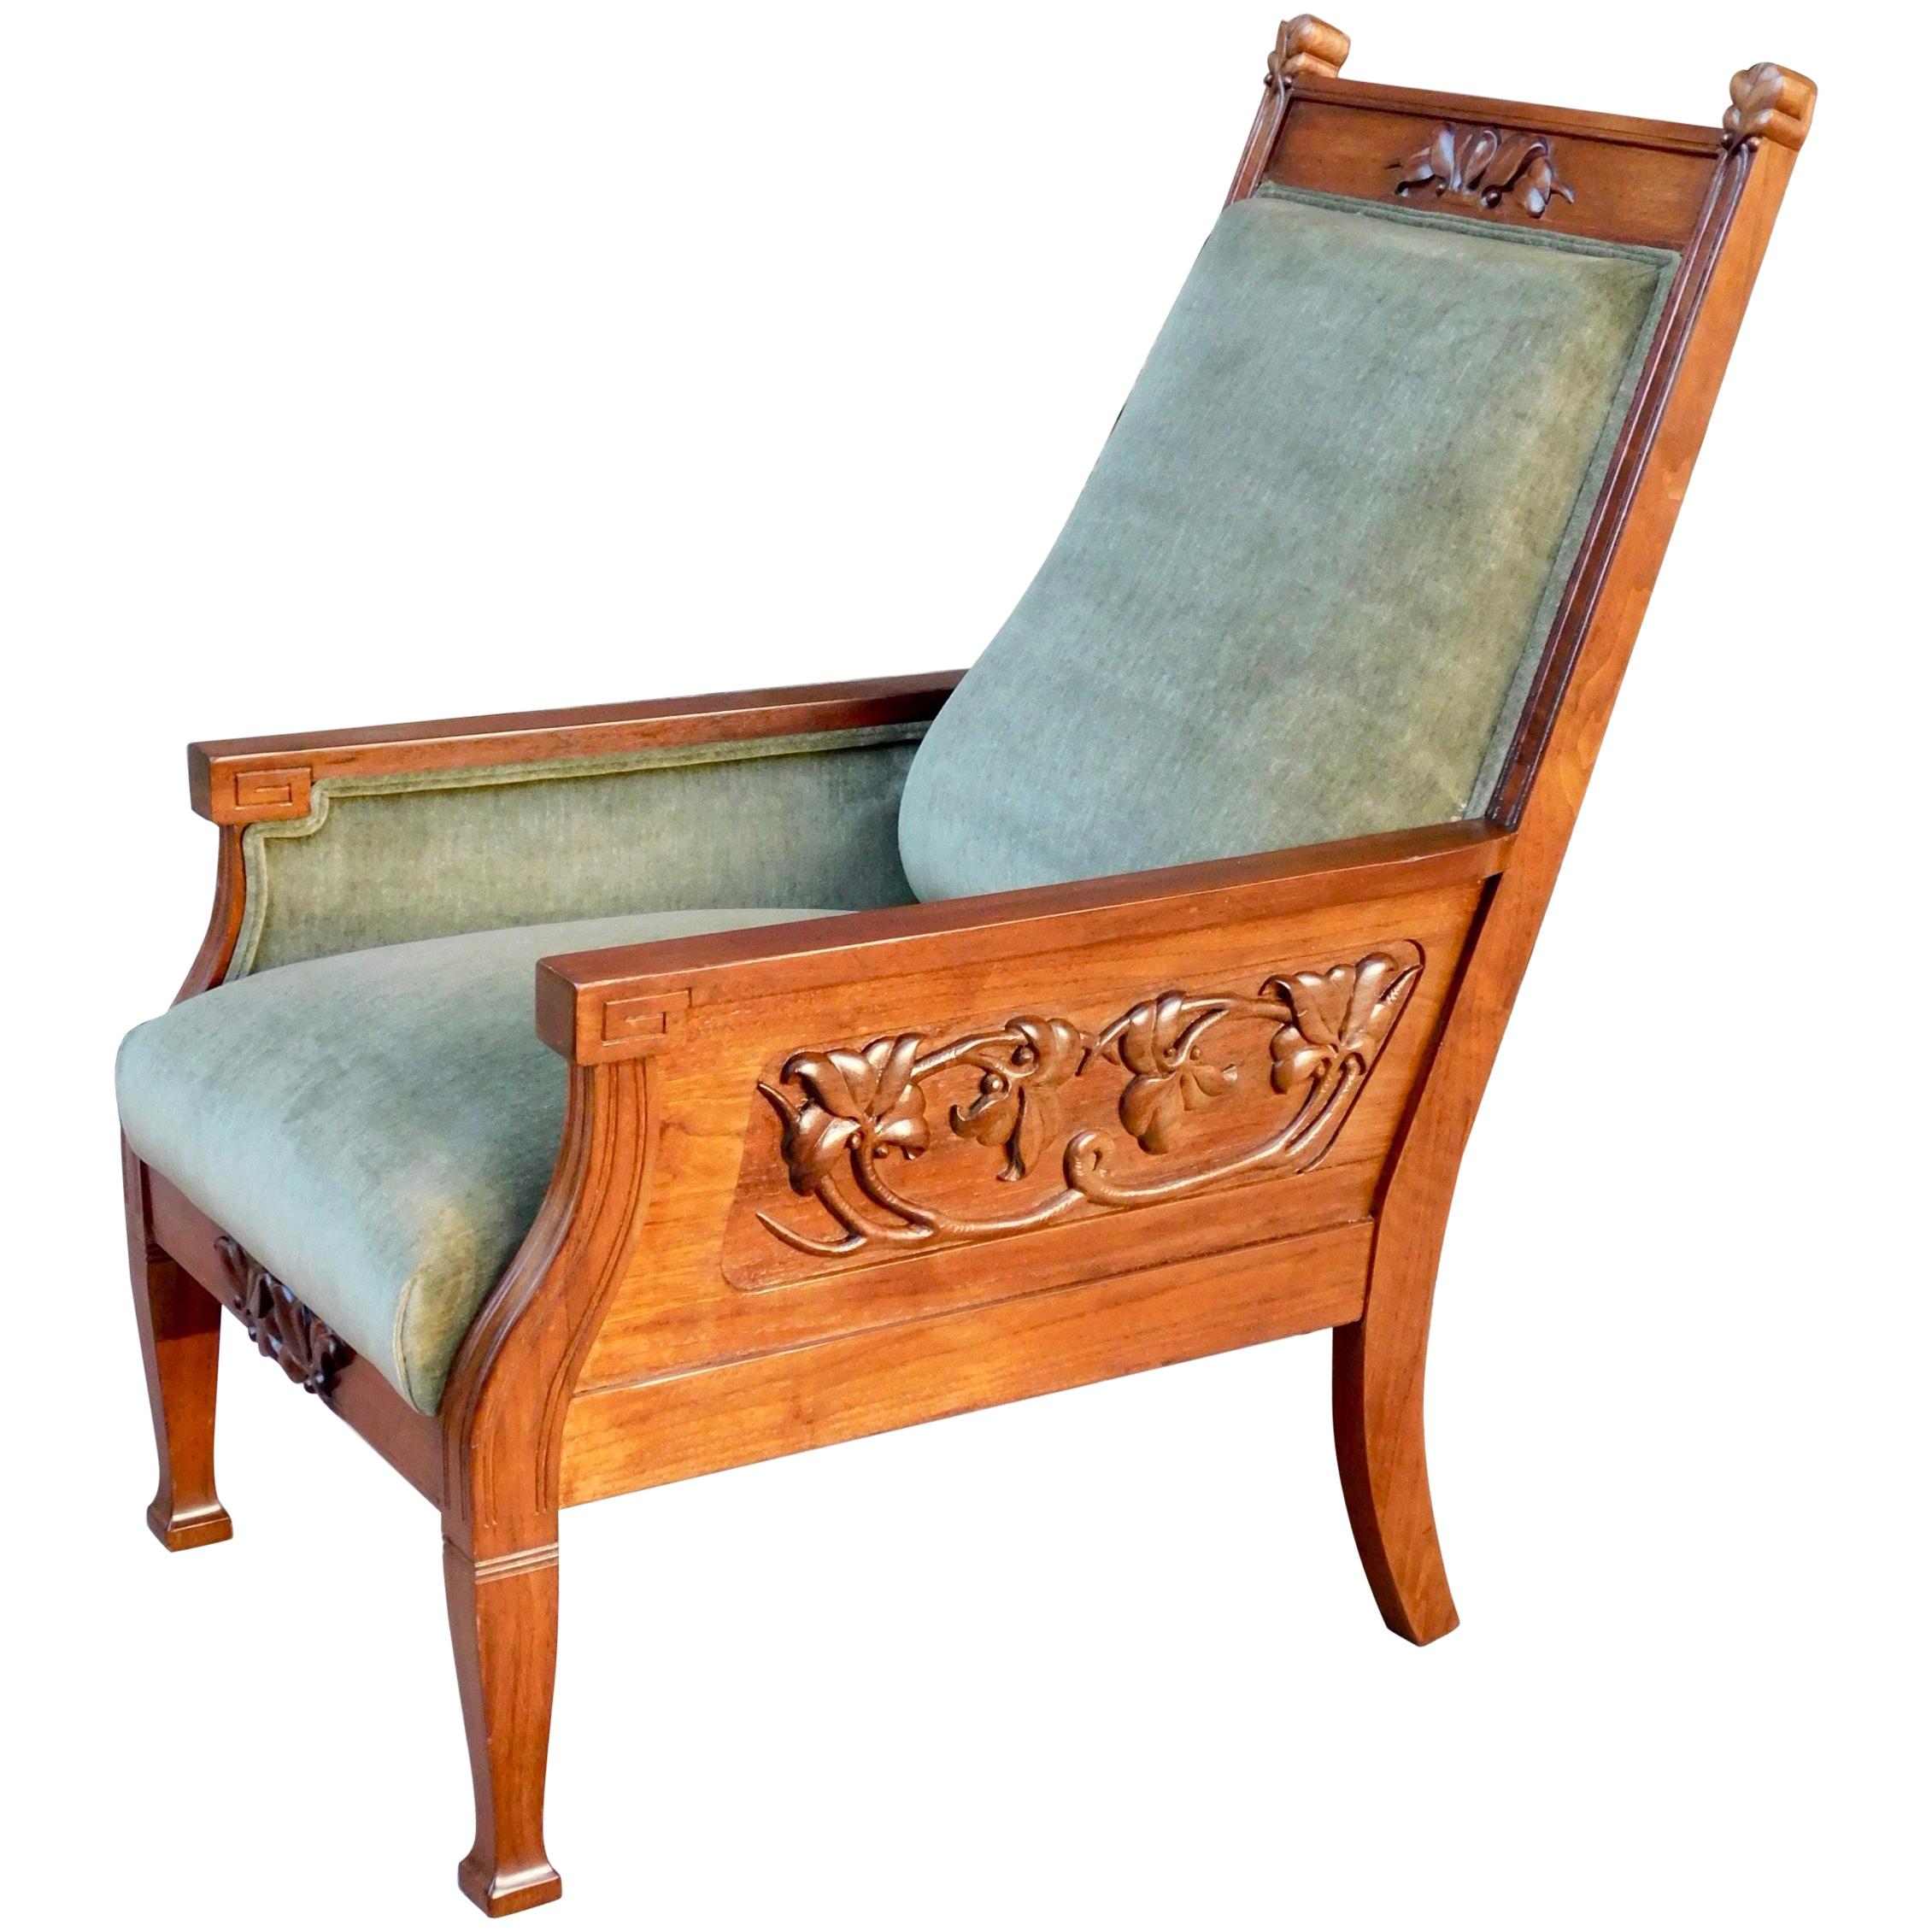 Swedish Arts & Crafts Paneled Chair with Carved Flora Motifs, circa 1900 For Sale